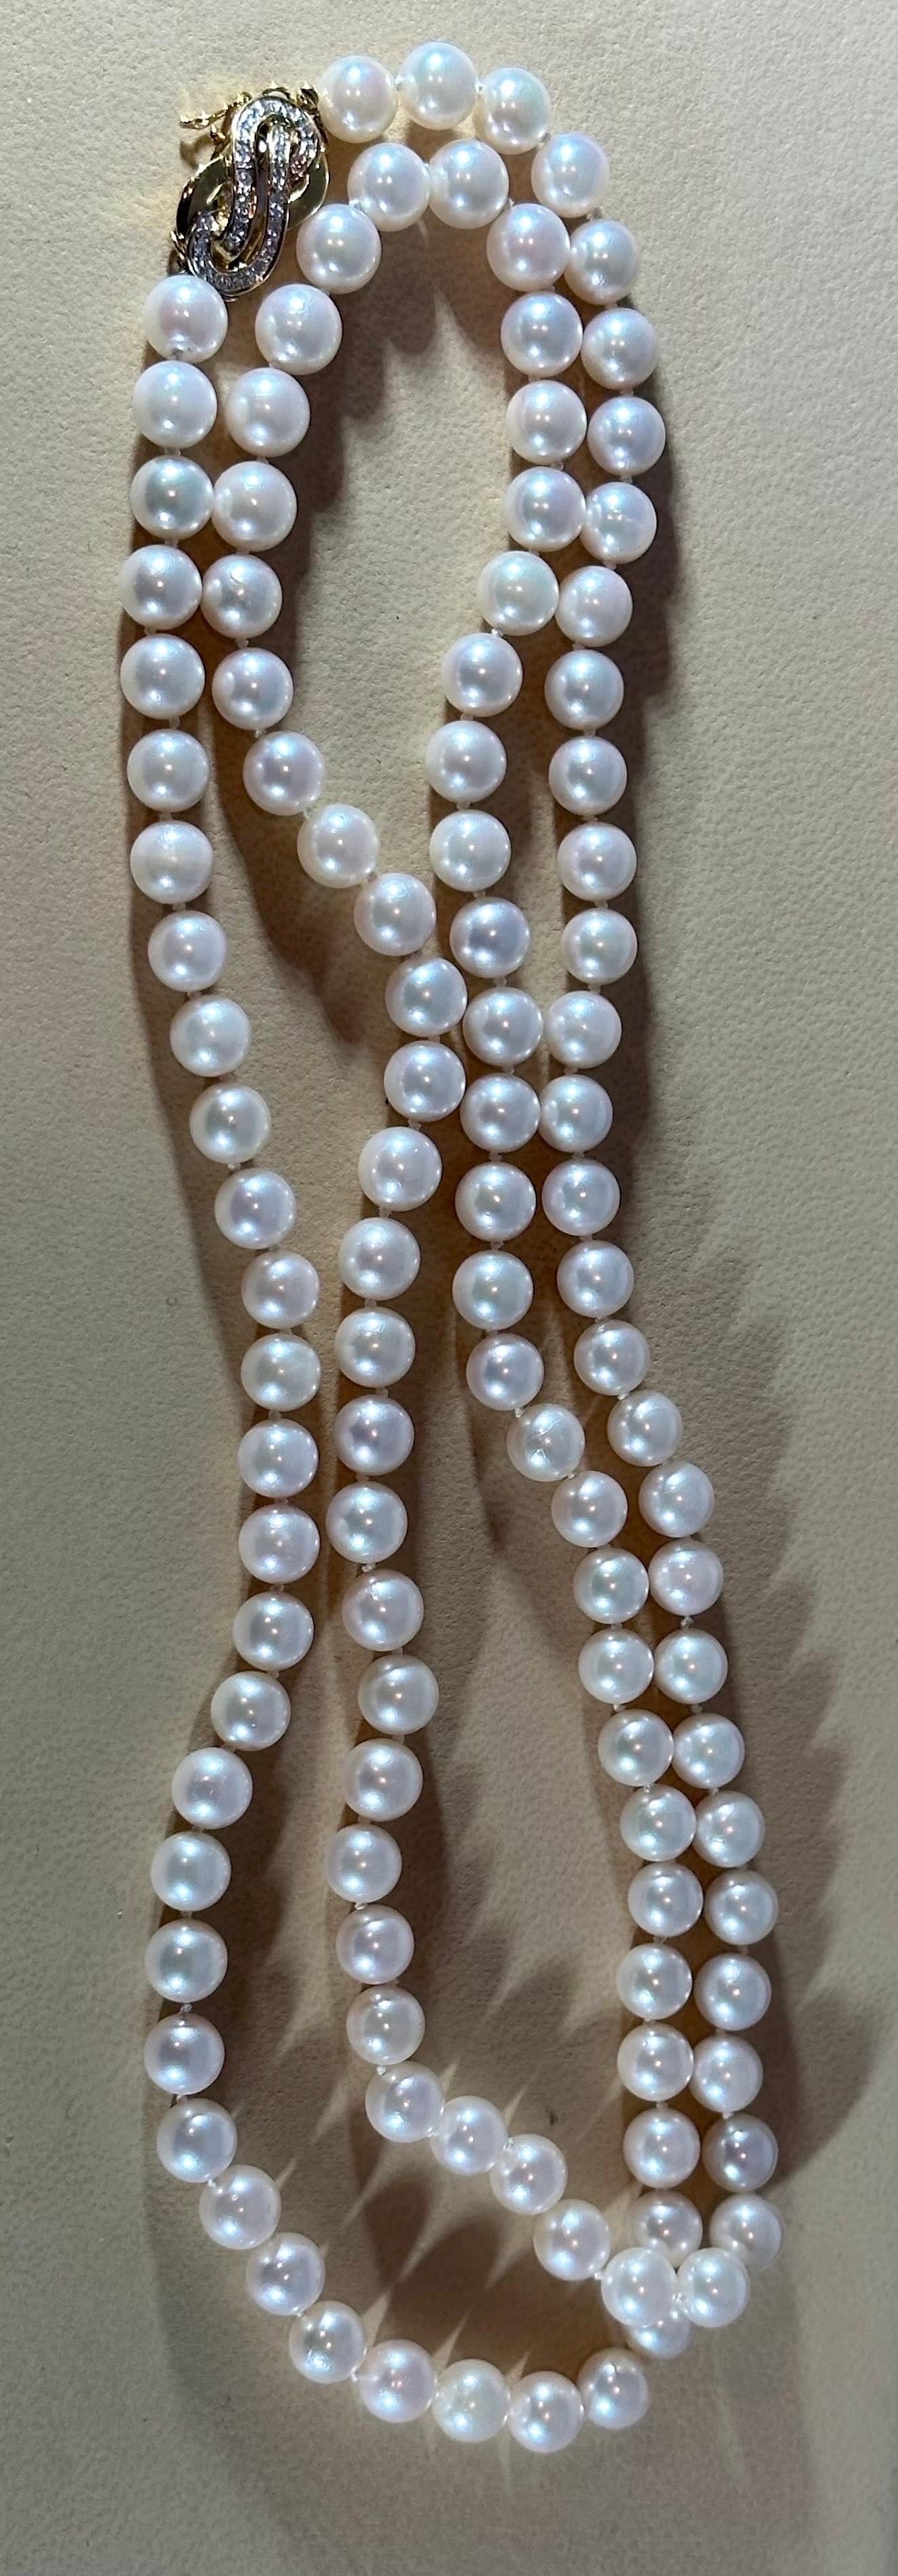 Vintage Cultured Akoya Pearl Strand Necklace Opera Length with Diamond Clasp For Sale 5